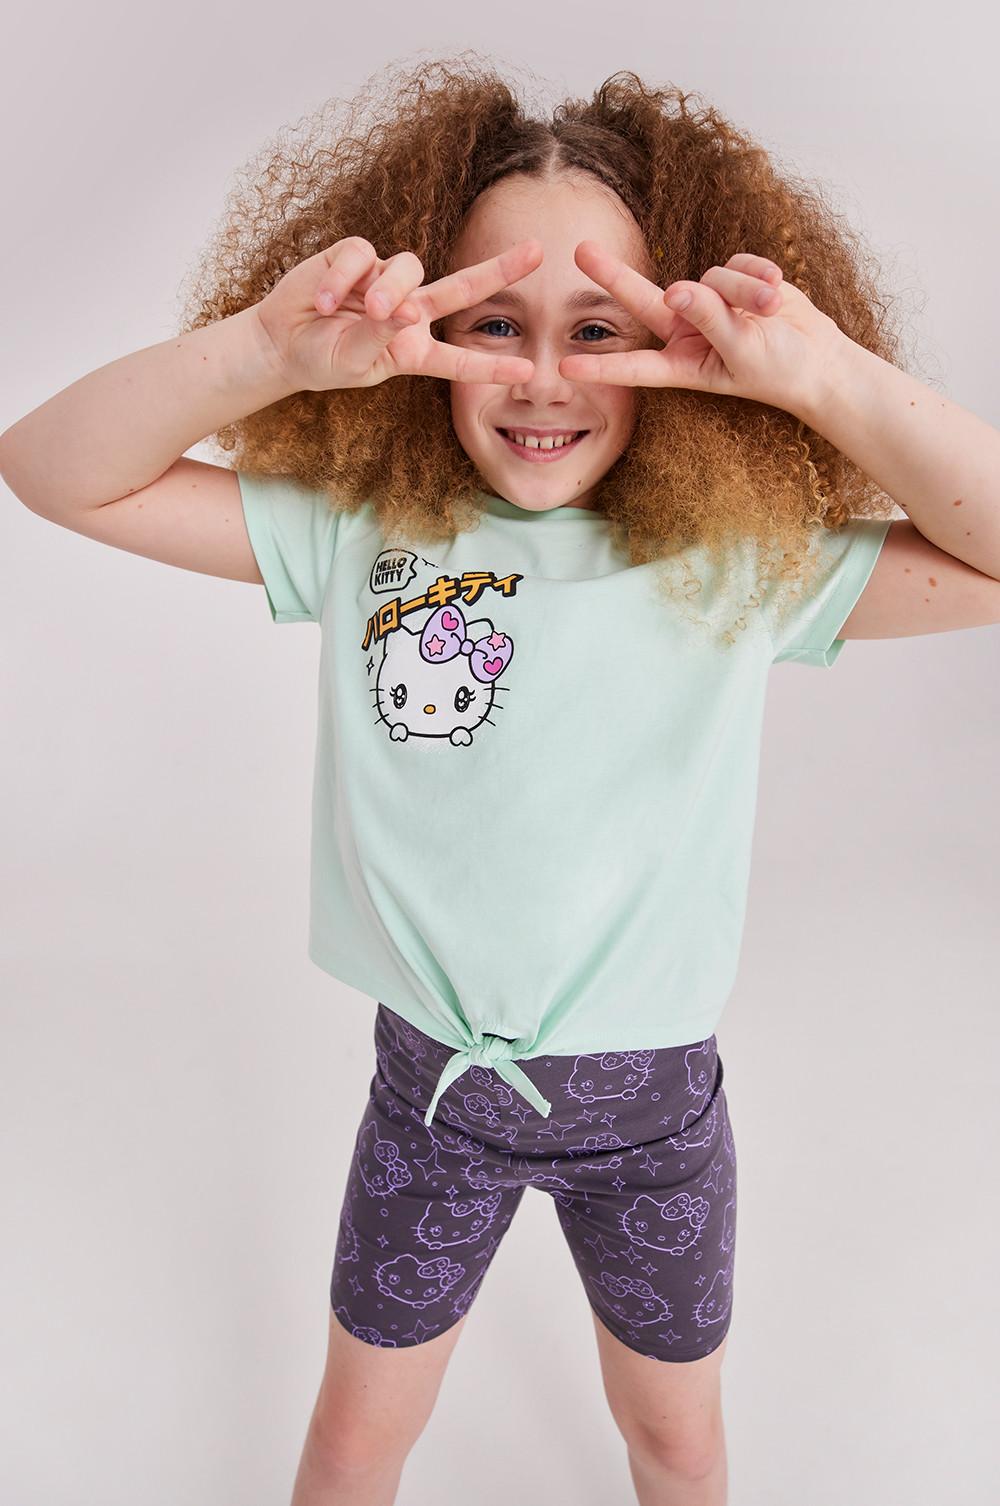 Our Hello Kitty Anime Kids Clothing Collection